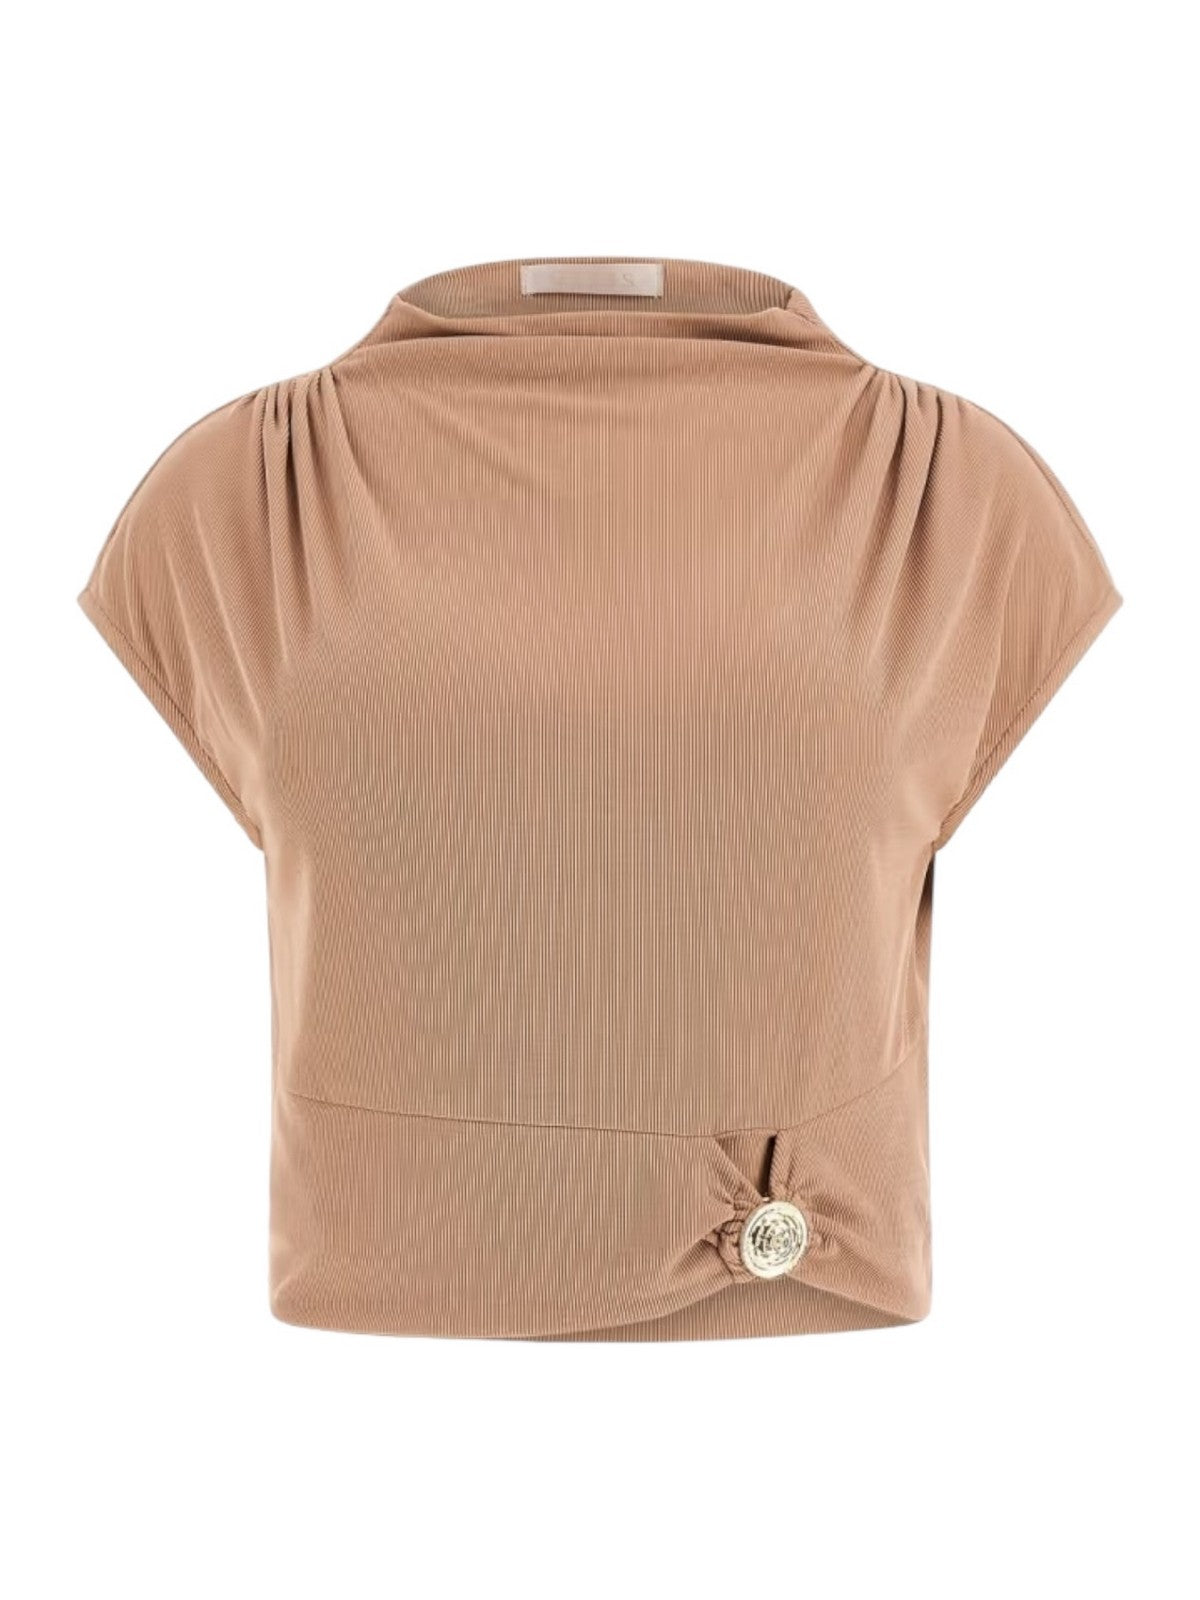 GUESS Top Femmes Sl Turtle Nk Febe To W4RP40 KAQL2 G1DQ Beige